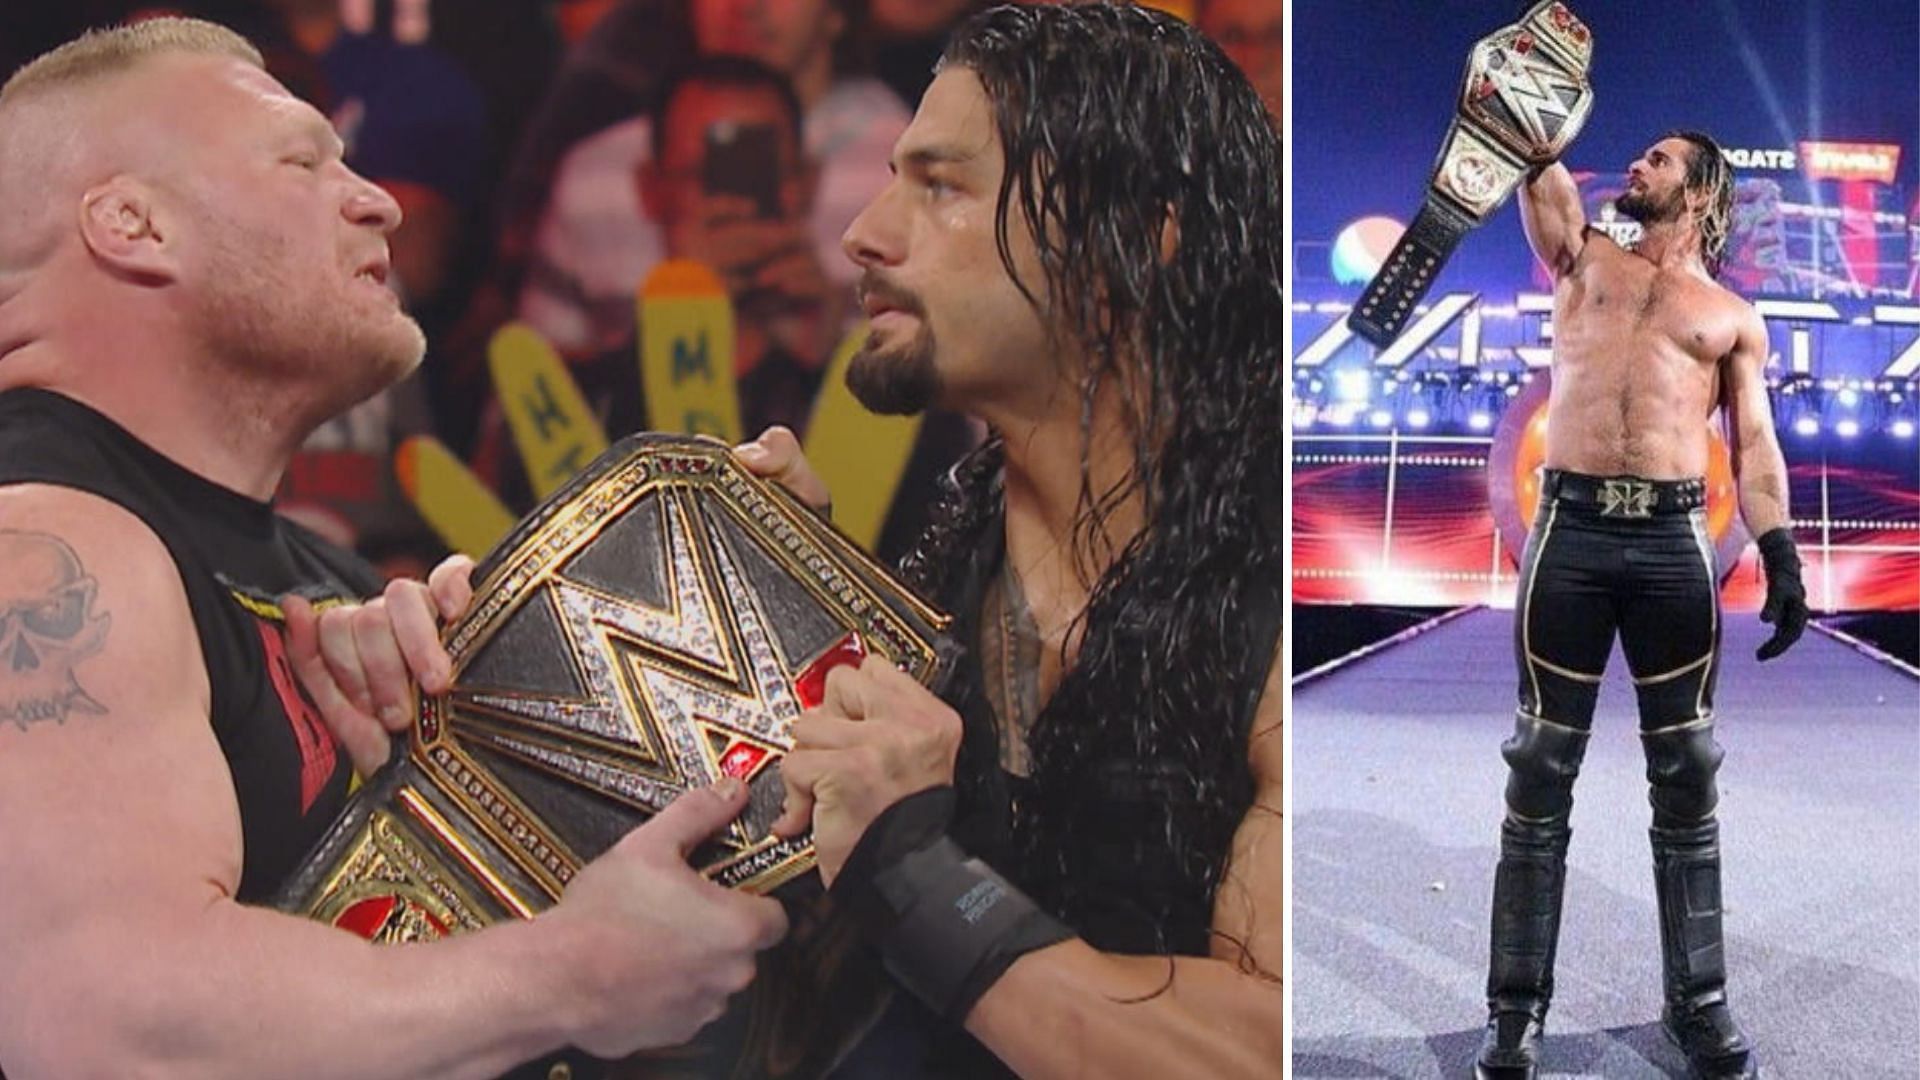 Roman Reigns versus Brock Lesnar at WrestleMania 31; Seth Rollins came out as the winner of the bout